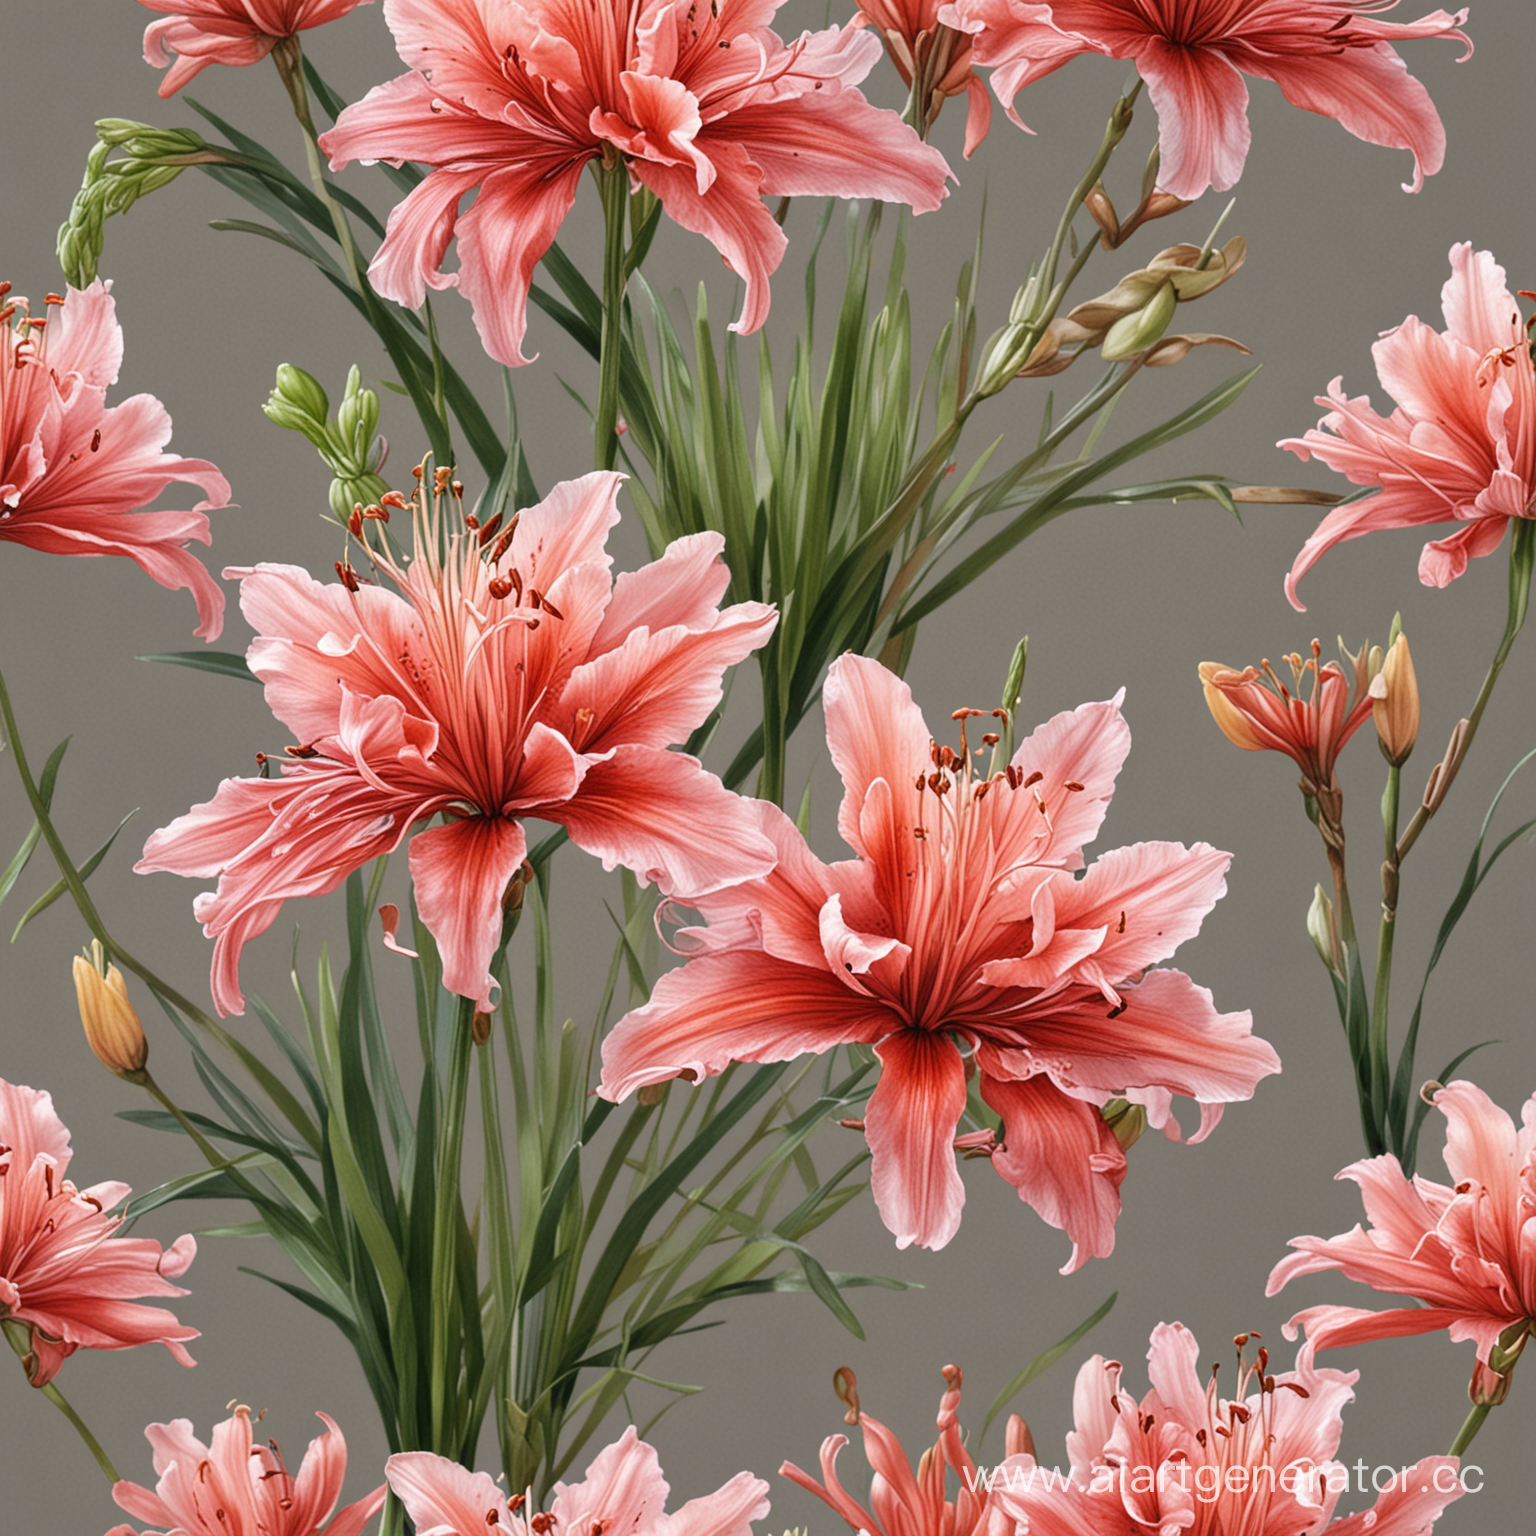 In a realistic picture, there is a lycoris flower
